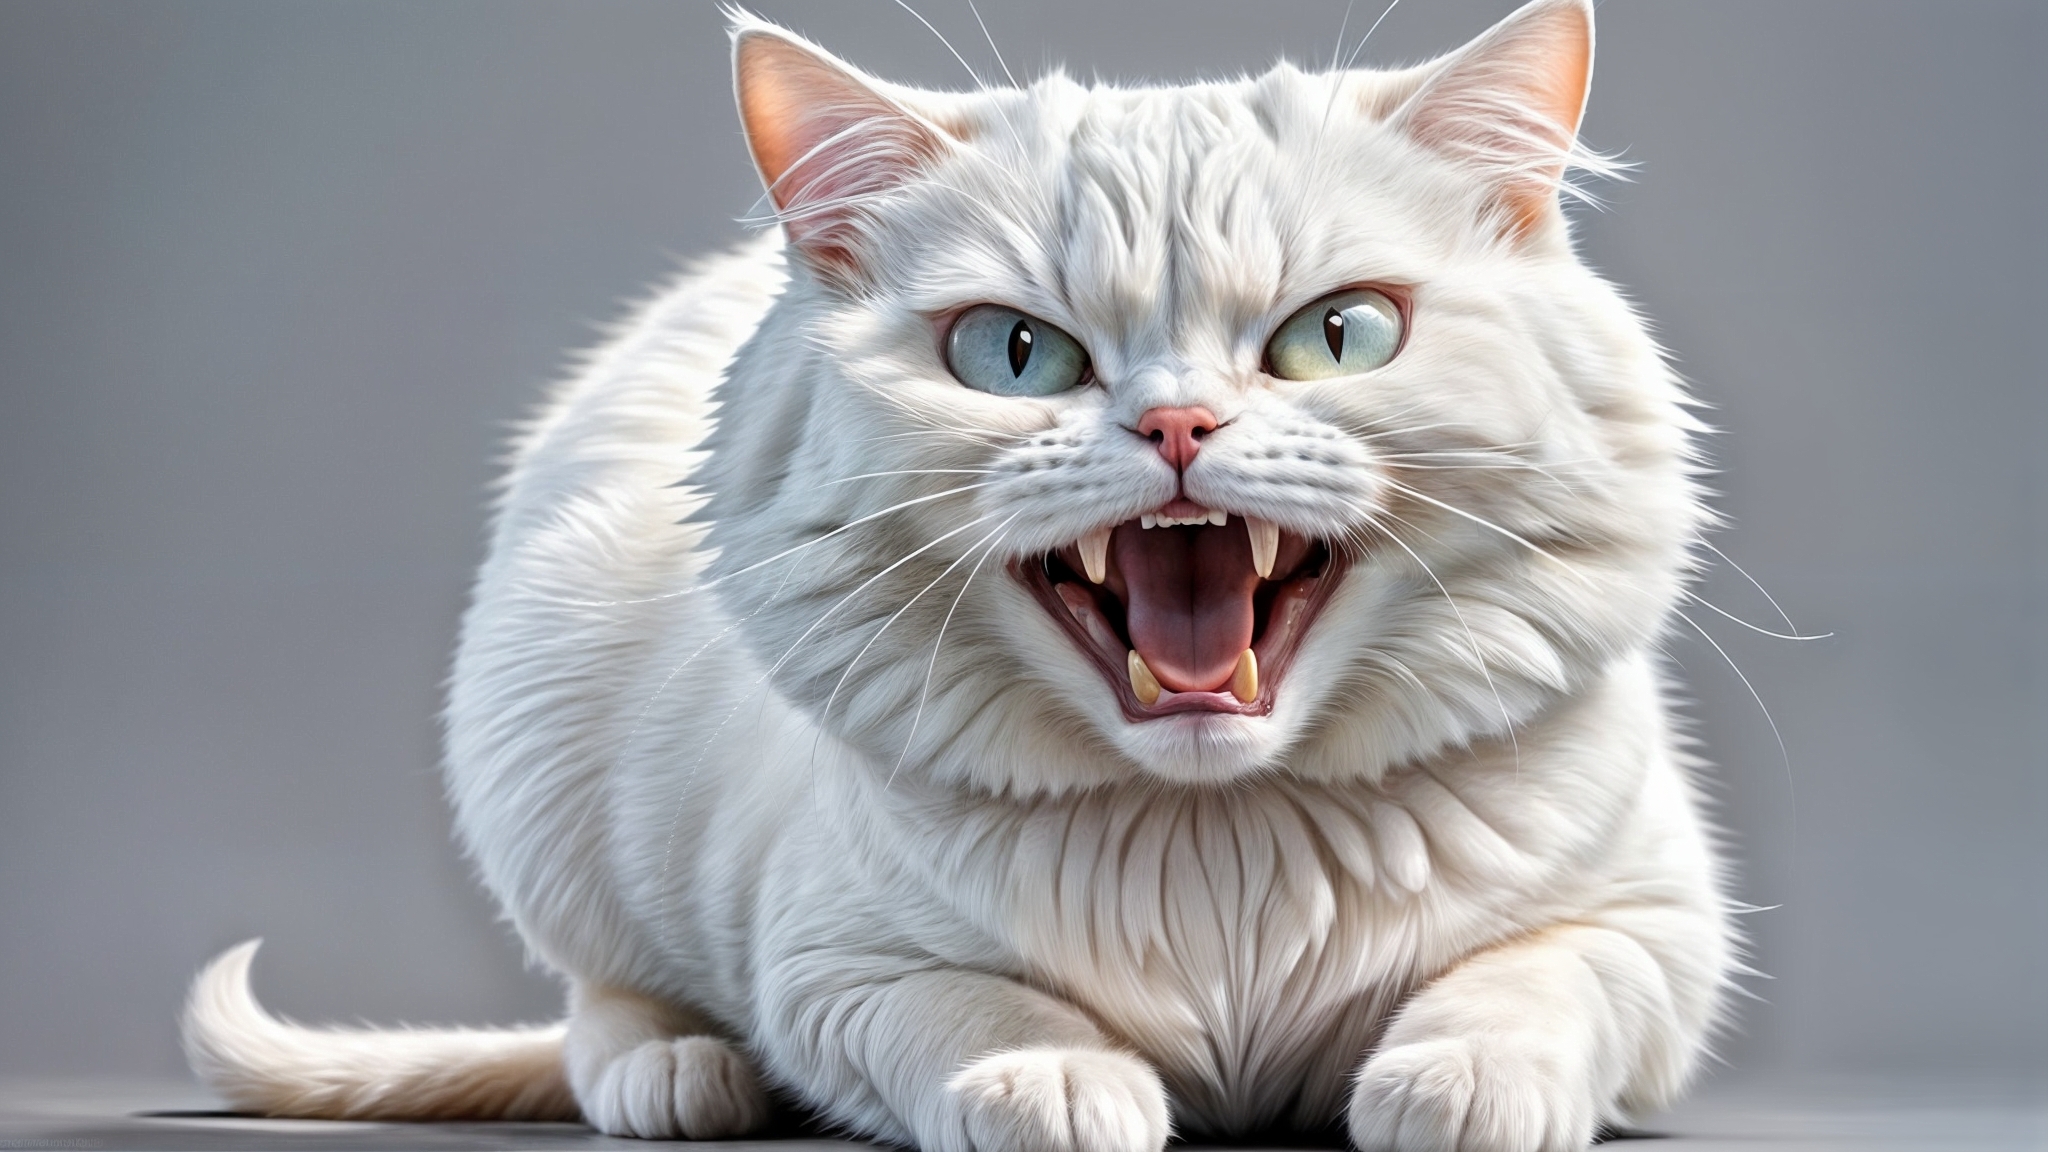 Free photo White angry cat on gray background